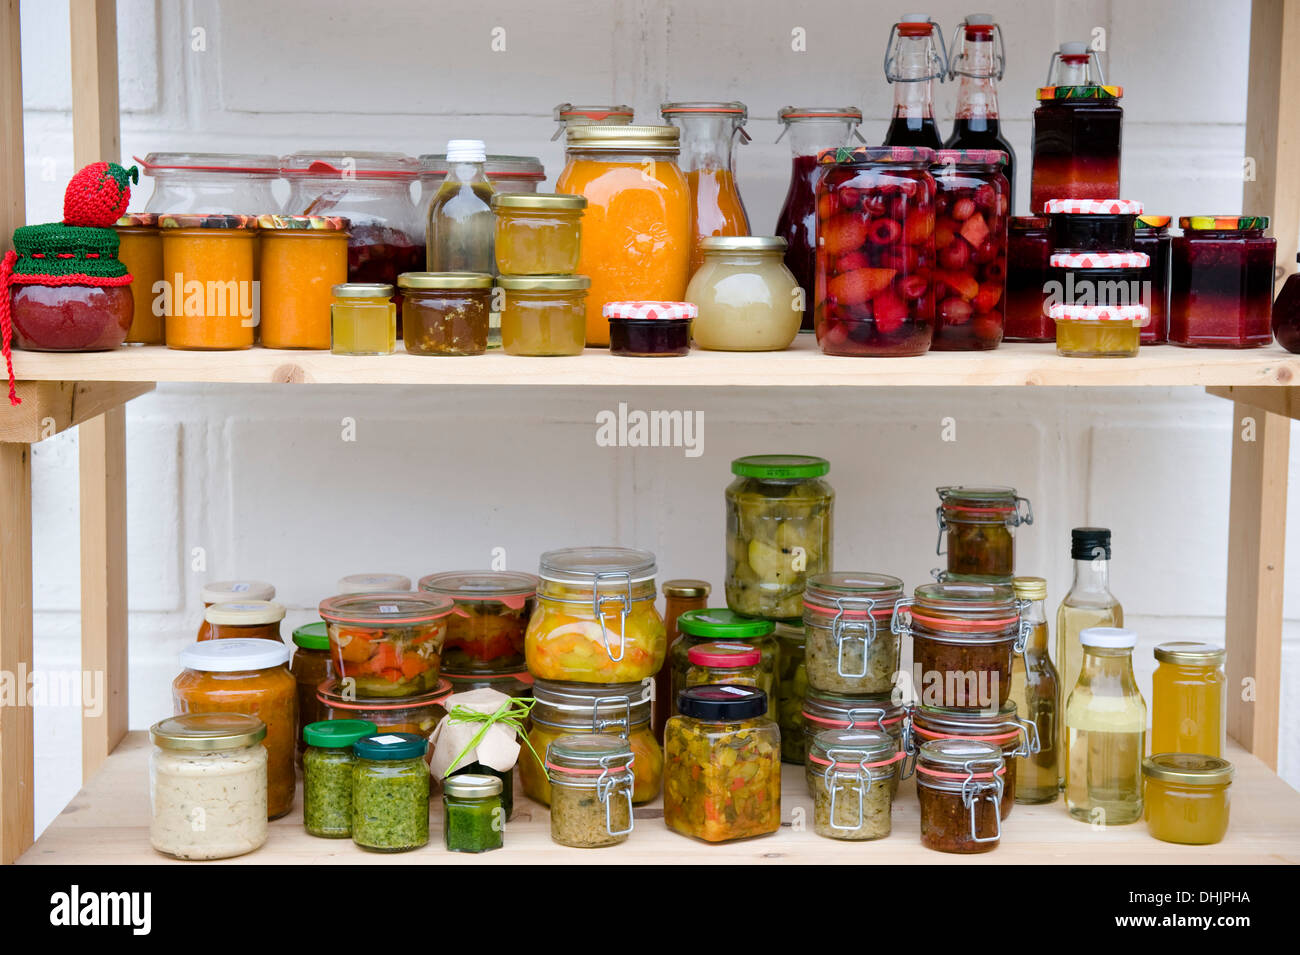 https://c8.alamy.com/comp/DHJPHA/food-larder-with-shelves-of-homemade-products-homemade-DHJPHA.jpg